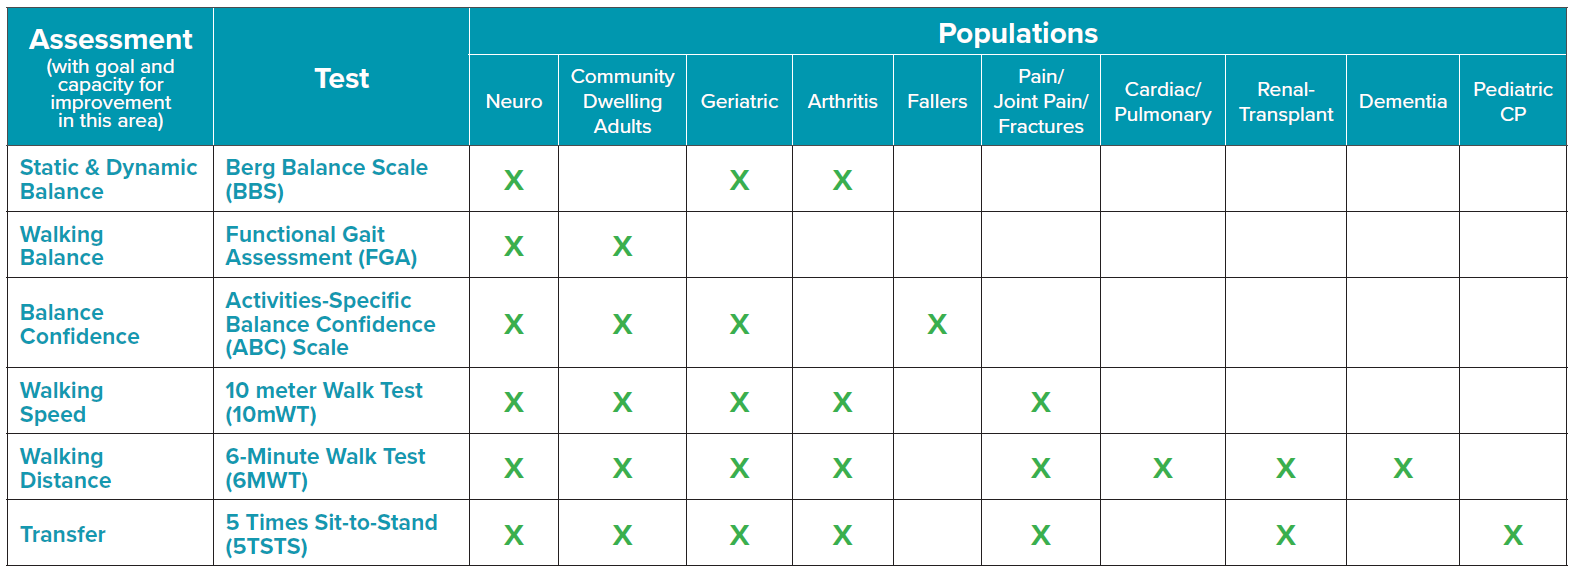 Core Set of Outcome Measures Across a Range of Populations